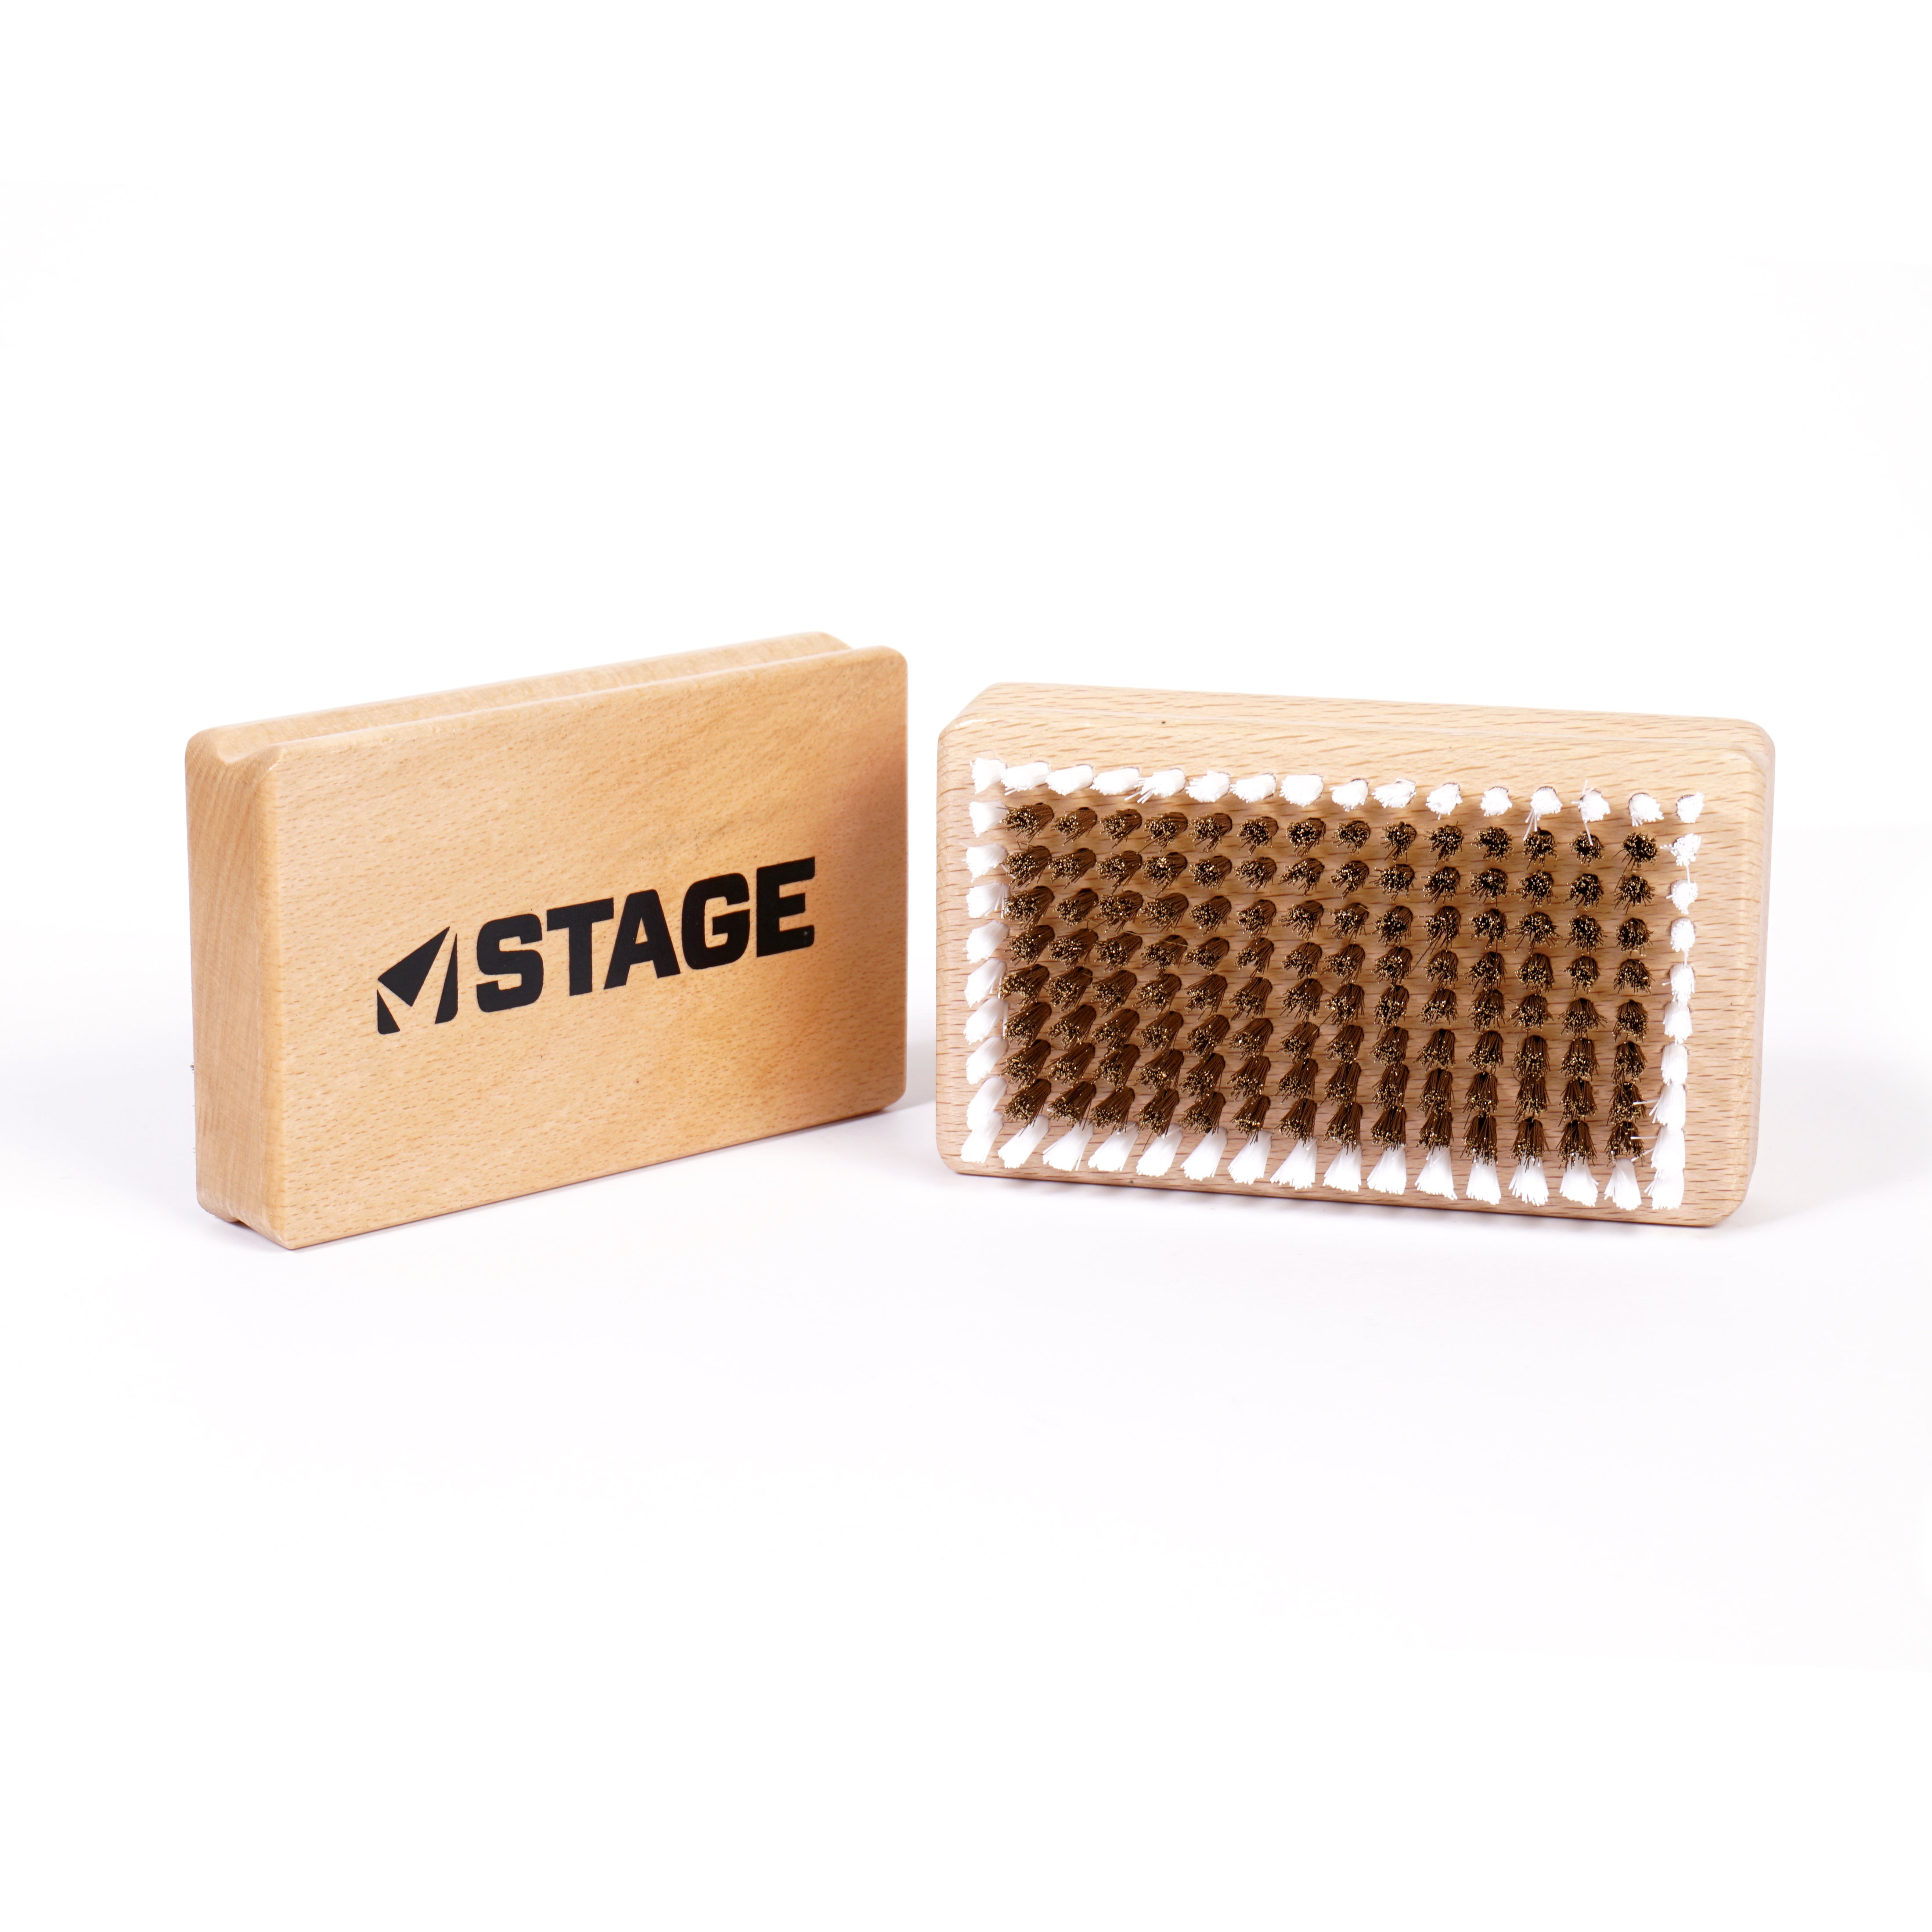 Stock image of the STAGE Brass Ski Wax Brush used for Ski & Snowboard Tuning